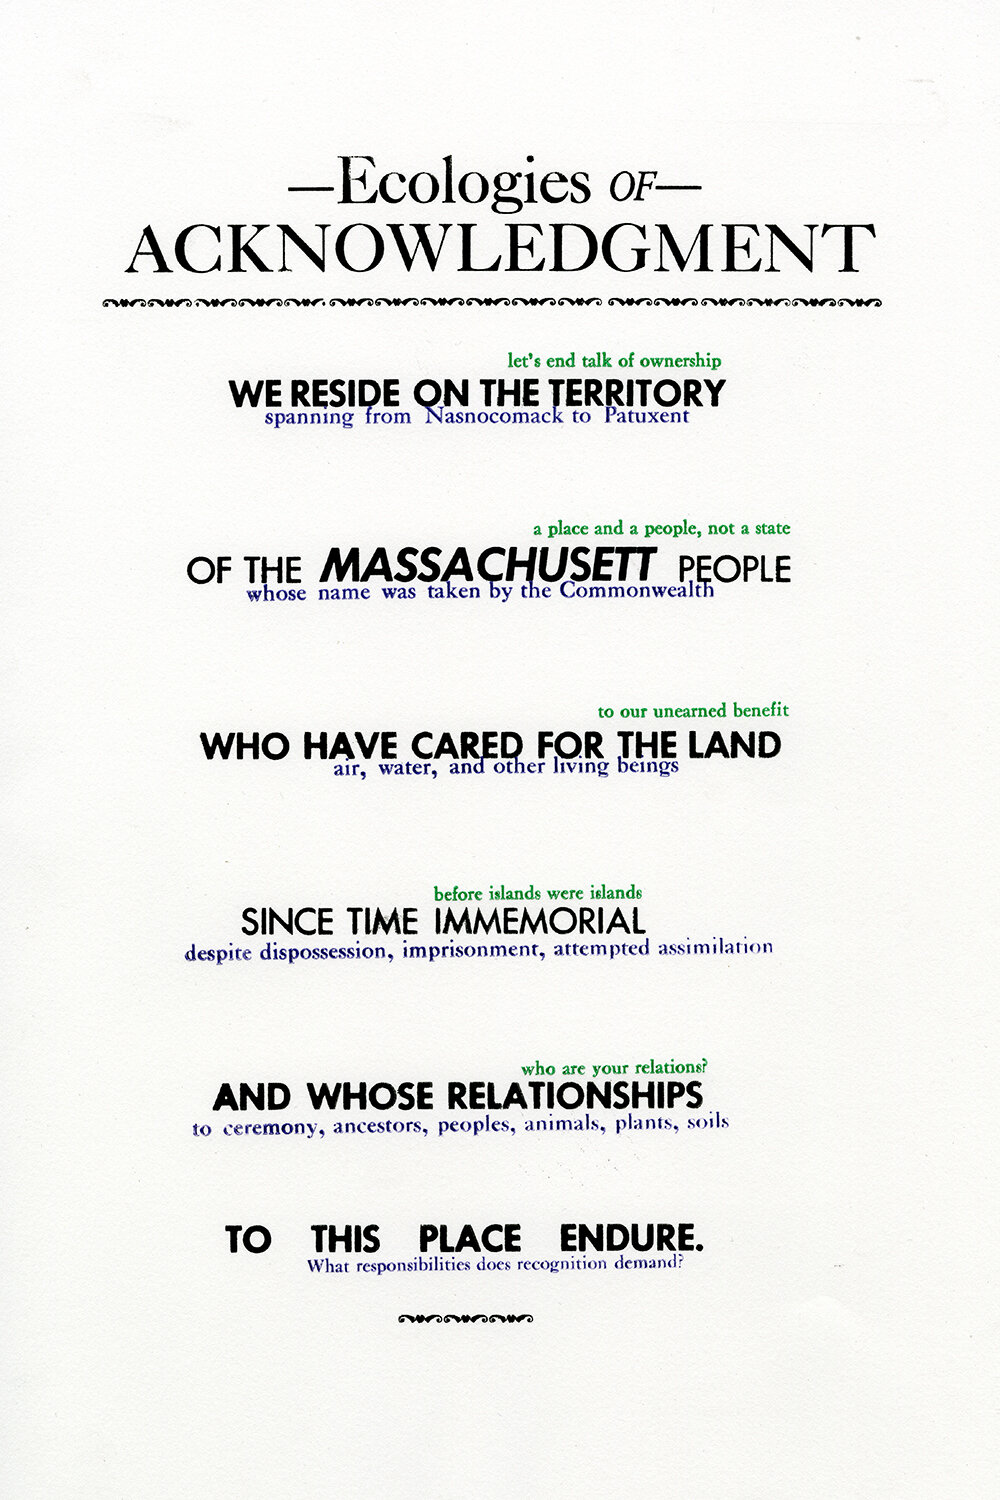 projects_ecologies_of_acknowledgment_print01.jpg